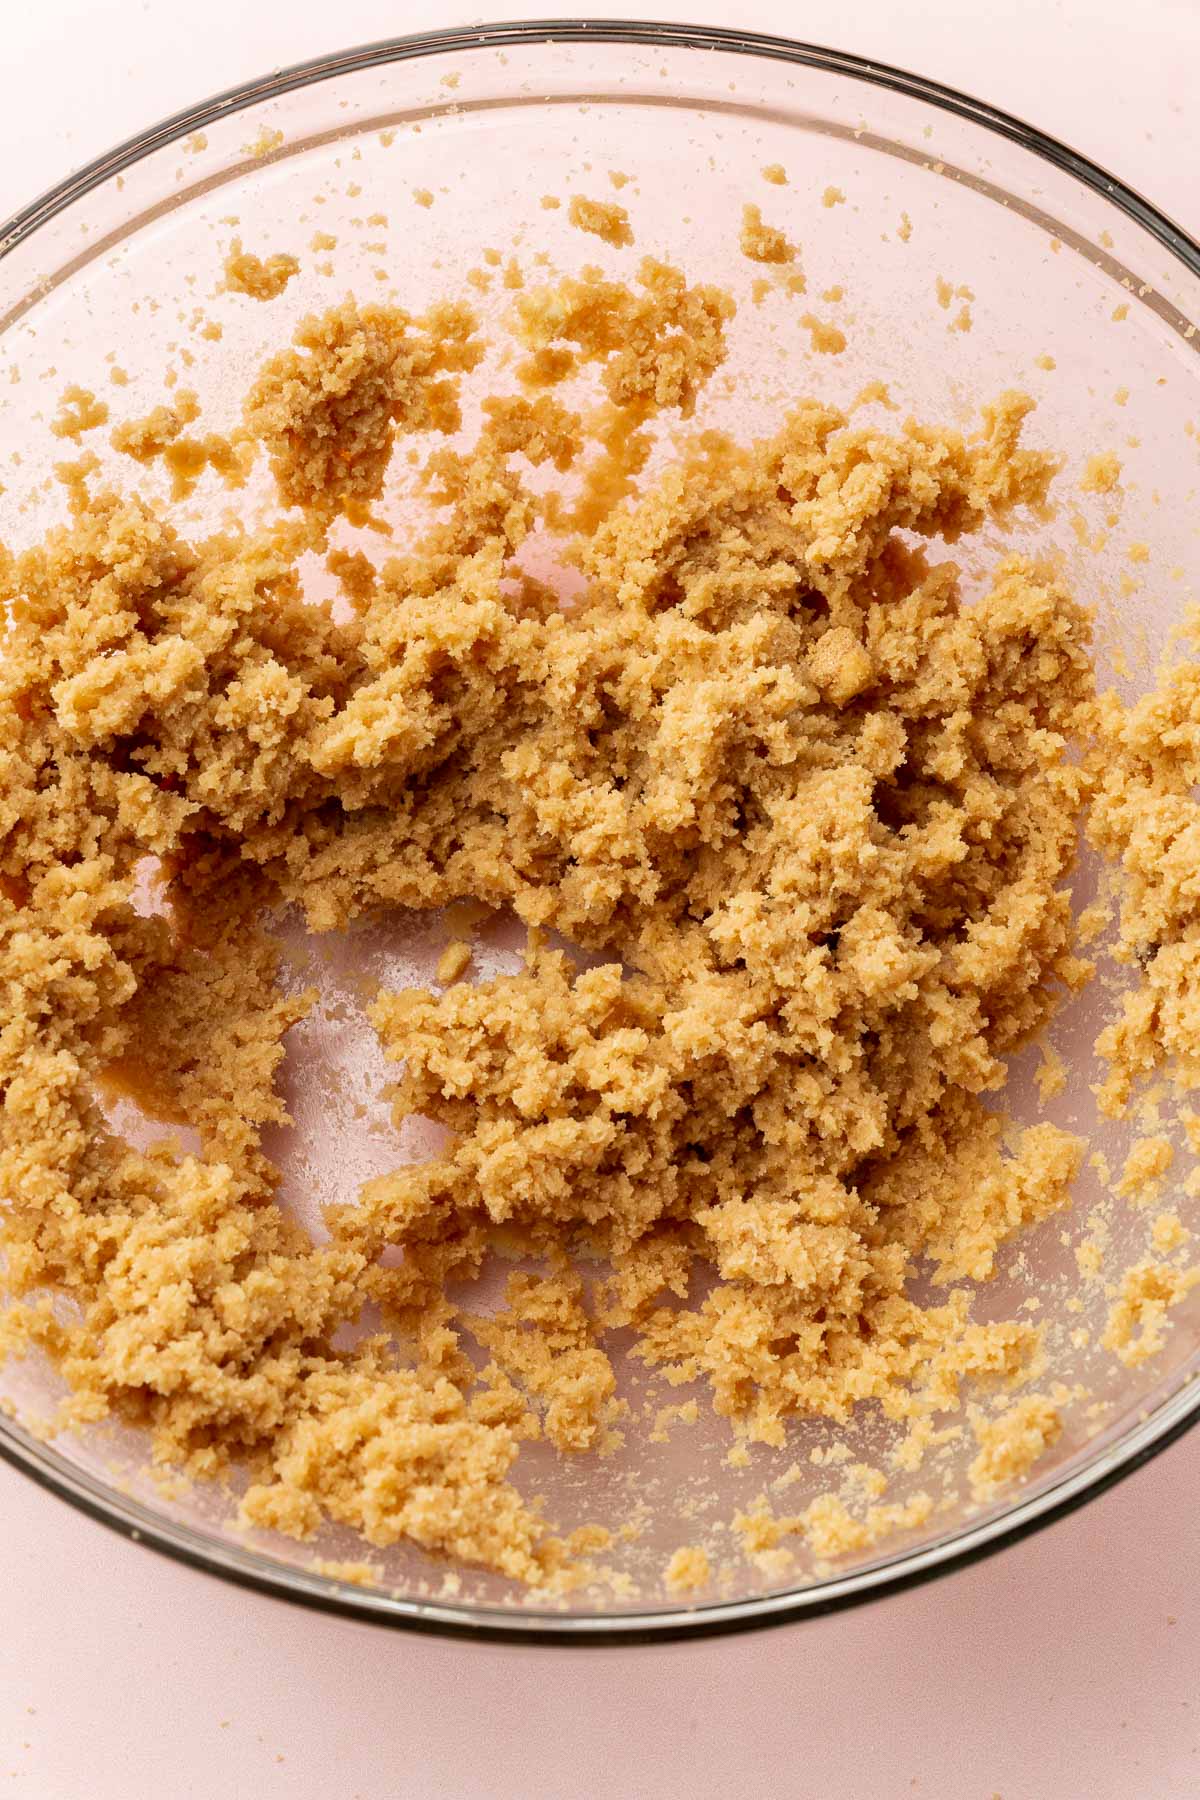 A glass mixing bowl with butter, brown sugar and granulated sugar that has been creamed together.